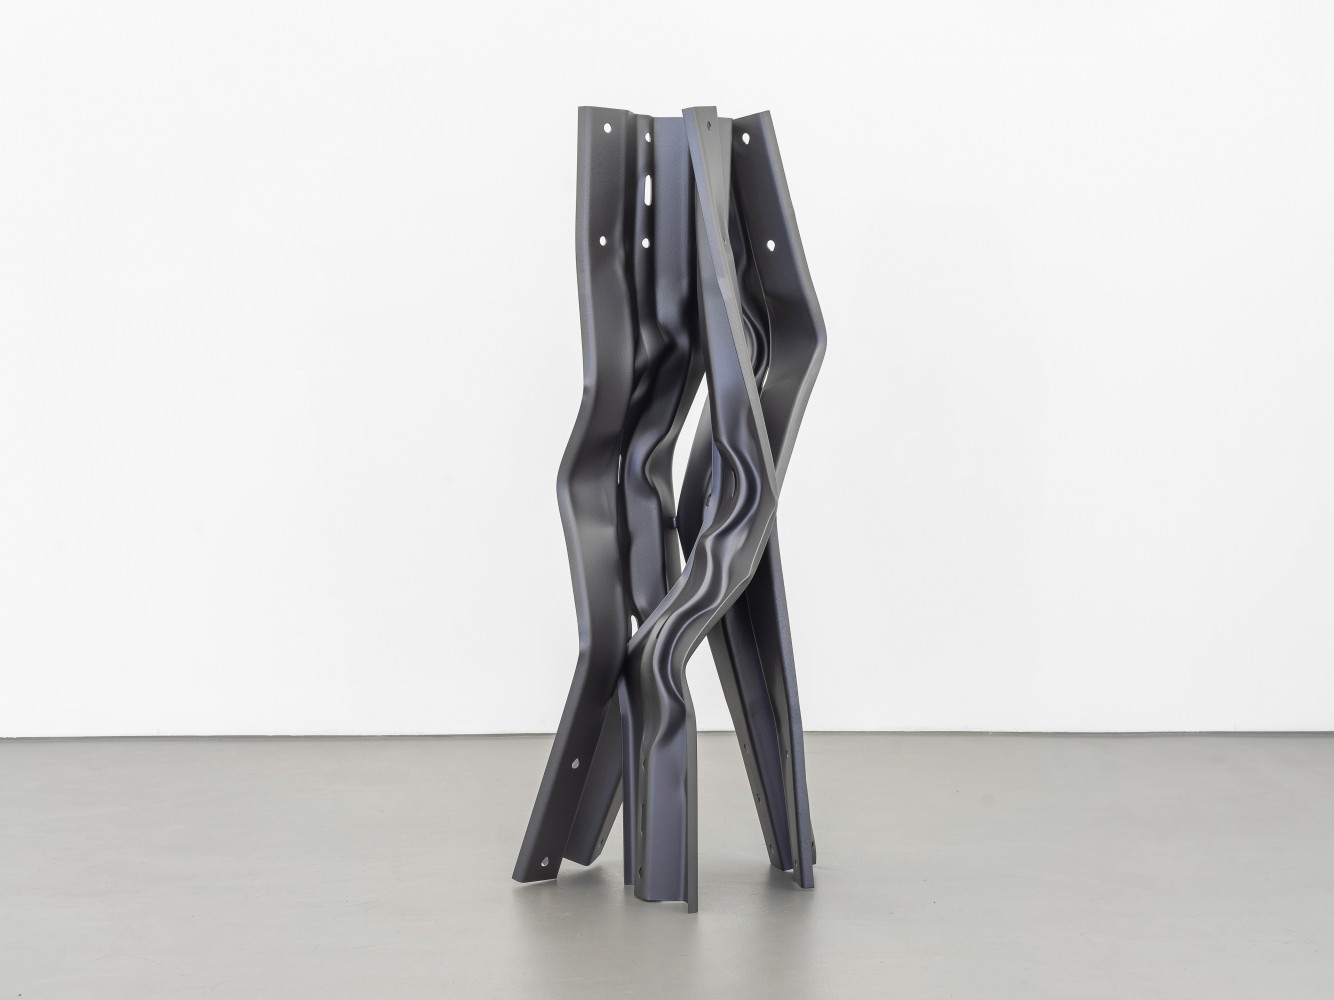 Bettina Pousttchi, ‘Vertical Highways A28’, 2023, Crash barriers, steel